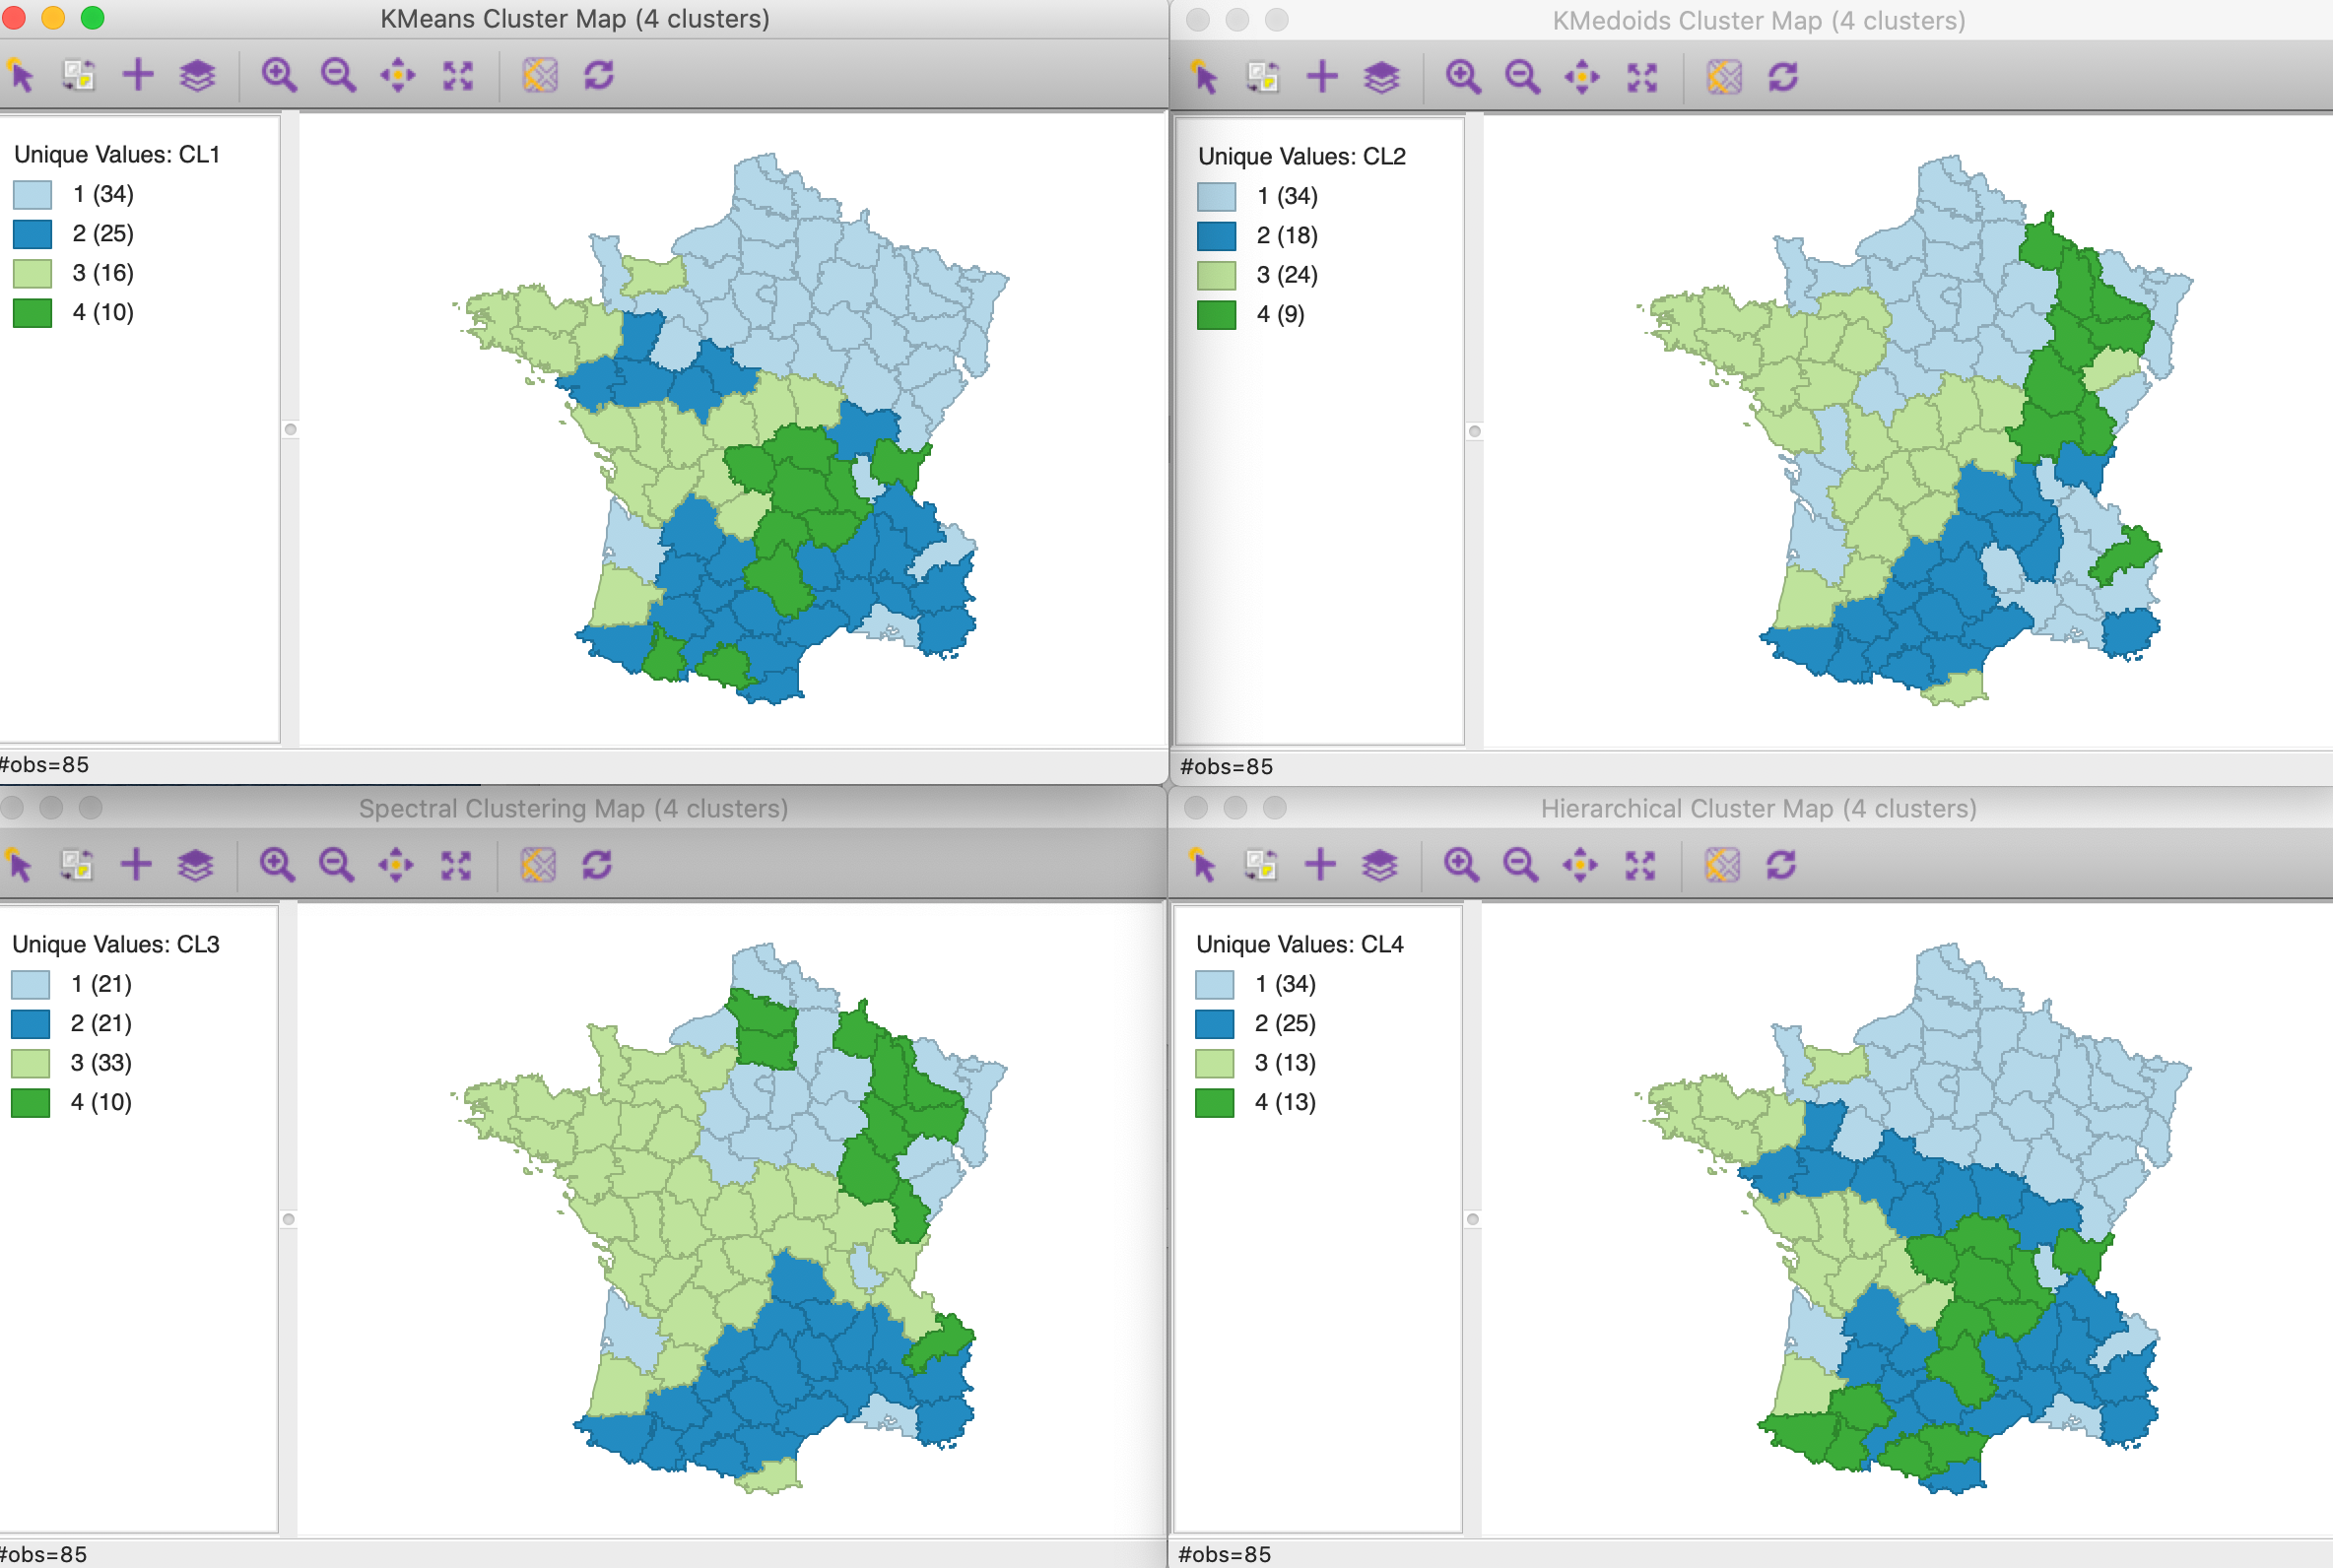 Cluster maps for six variables with k=4